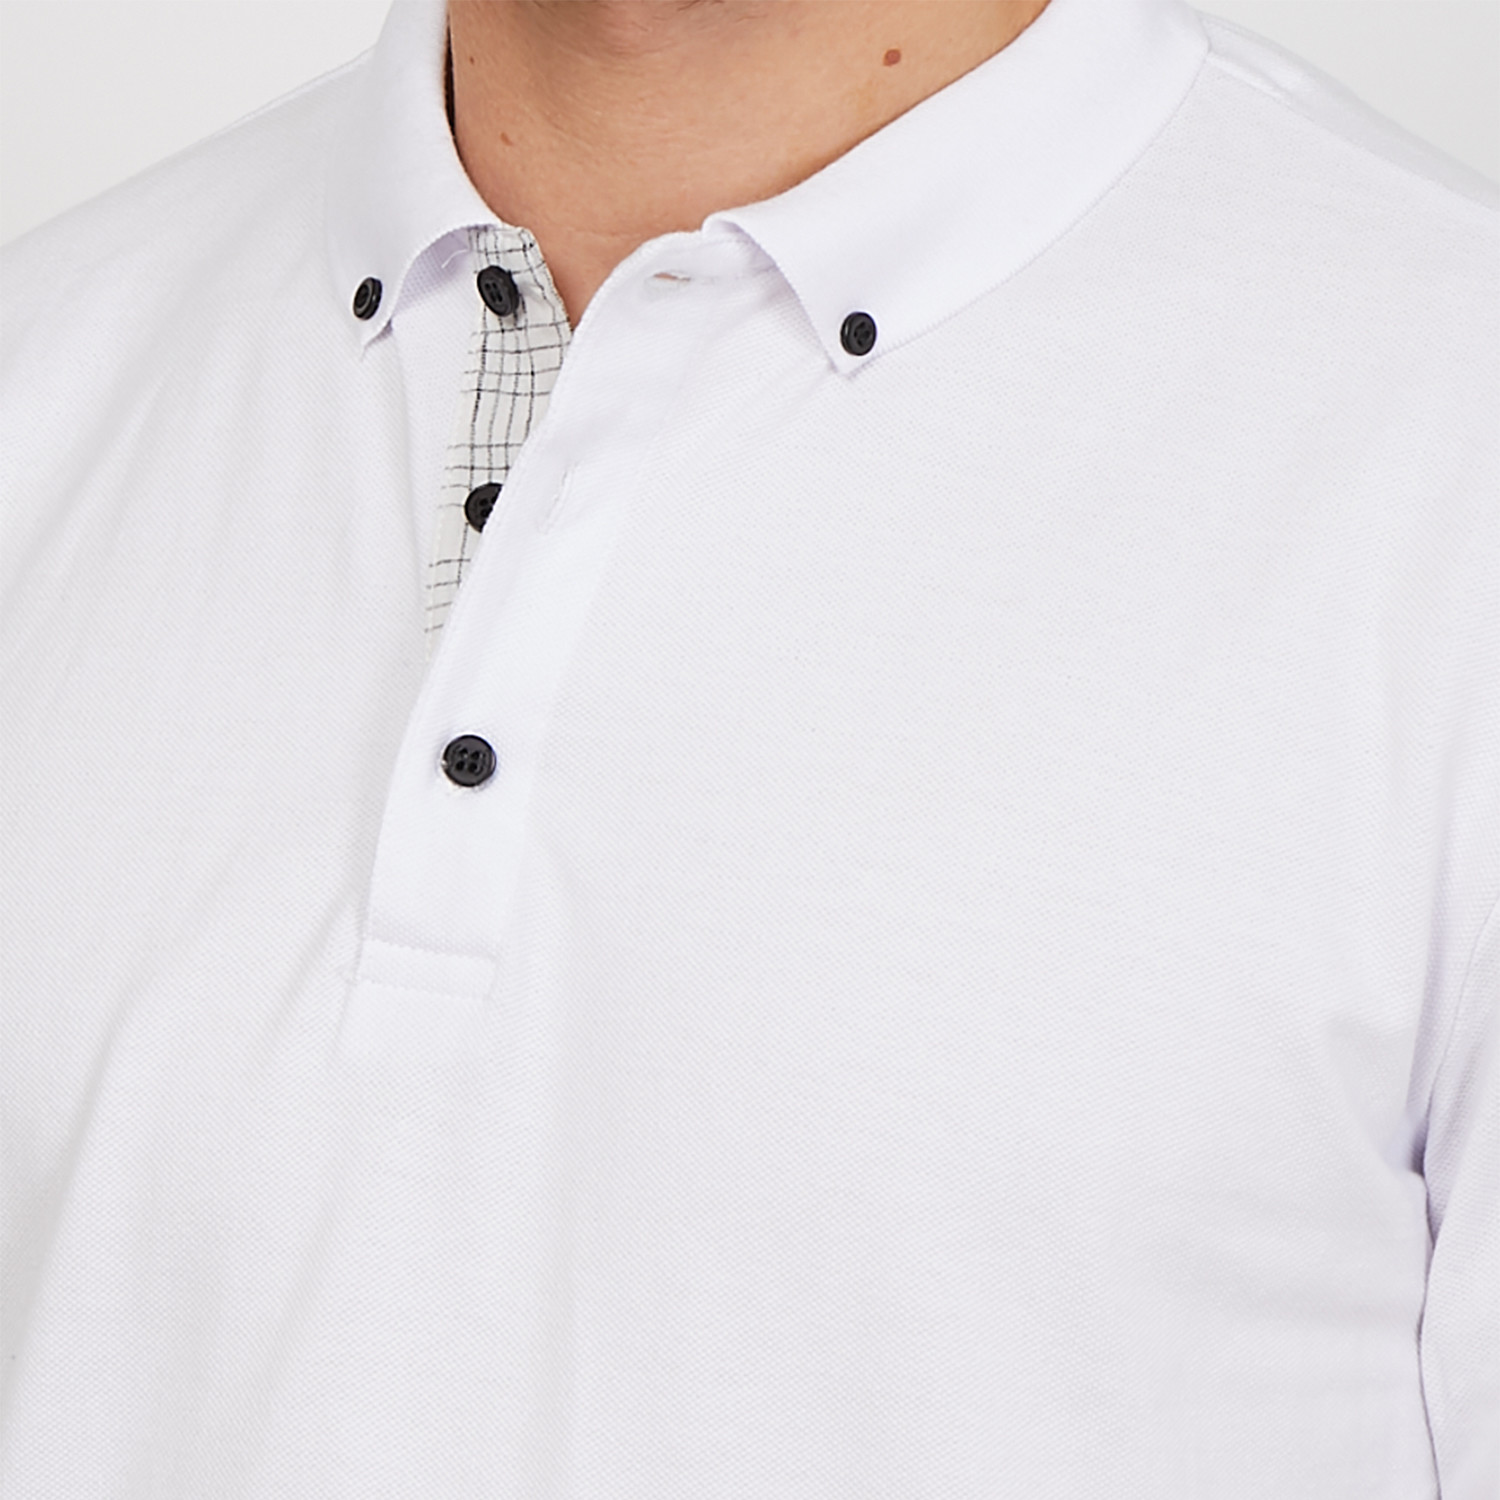 Angelo Polo Button Up // White (Small) - St. Lynn - Touch of Modern